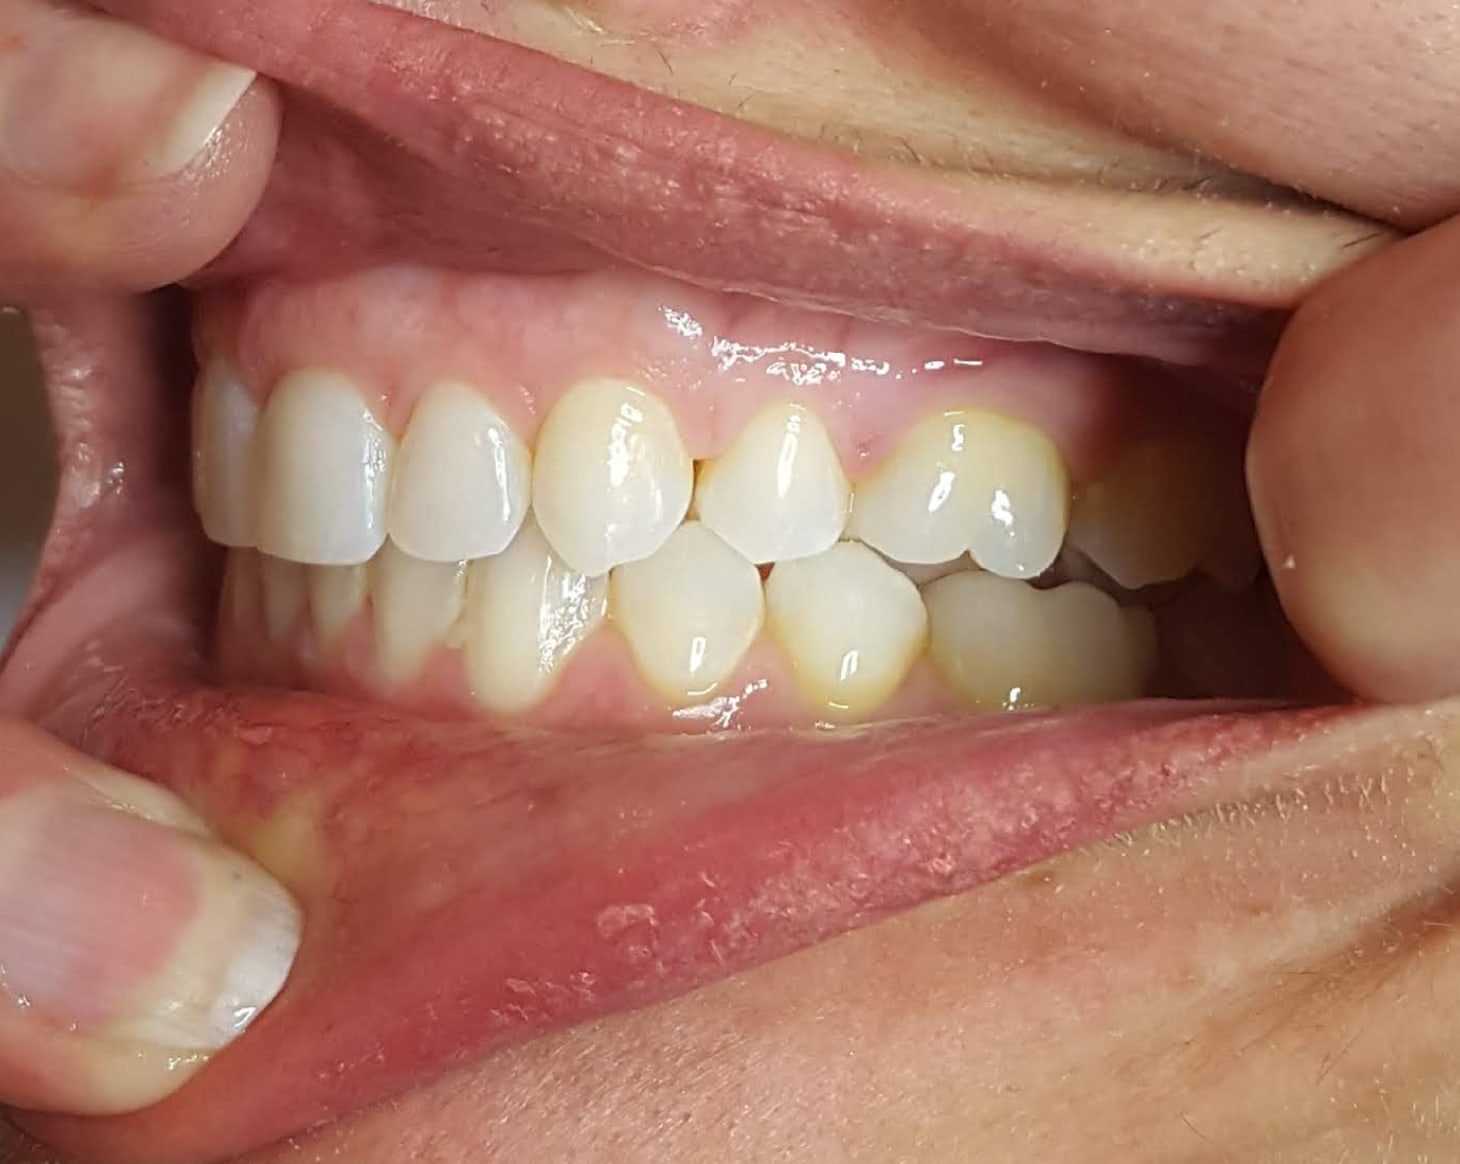 Using two fingers in the front to hold the lips away from the teeth and one finger in the back and take to photo angled to show the left back teeth